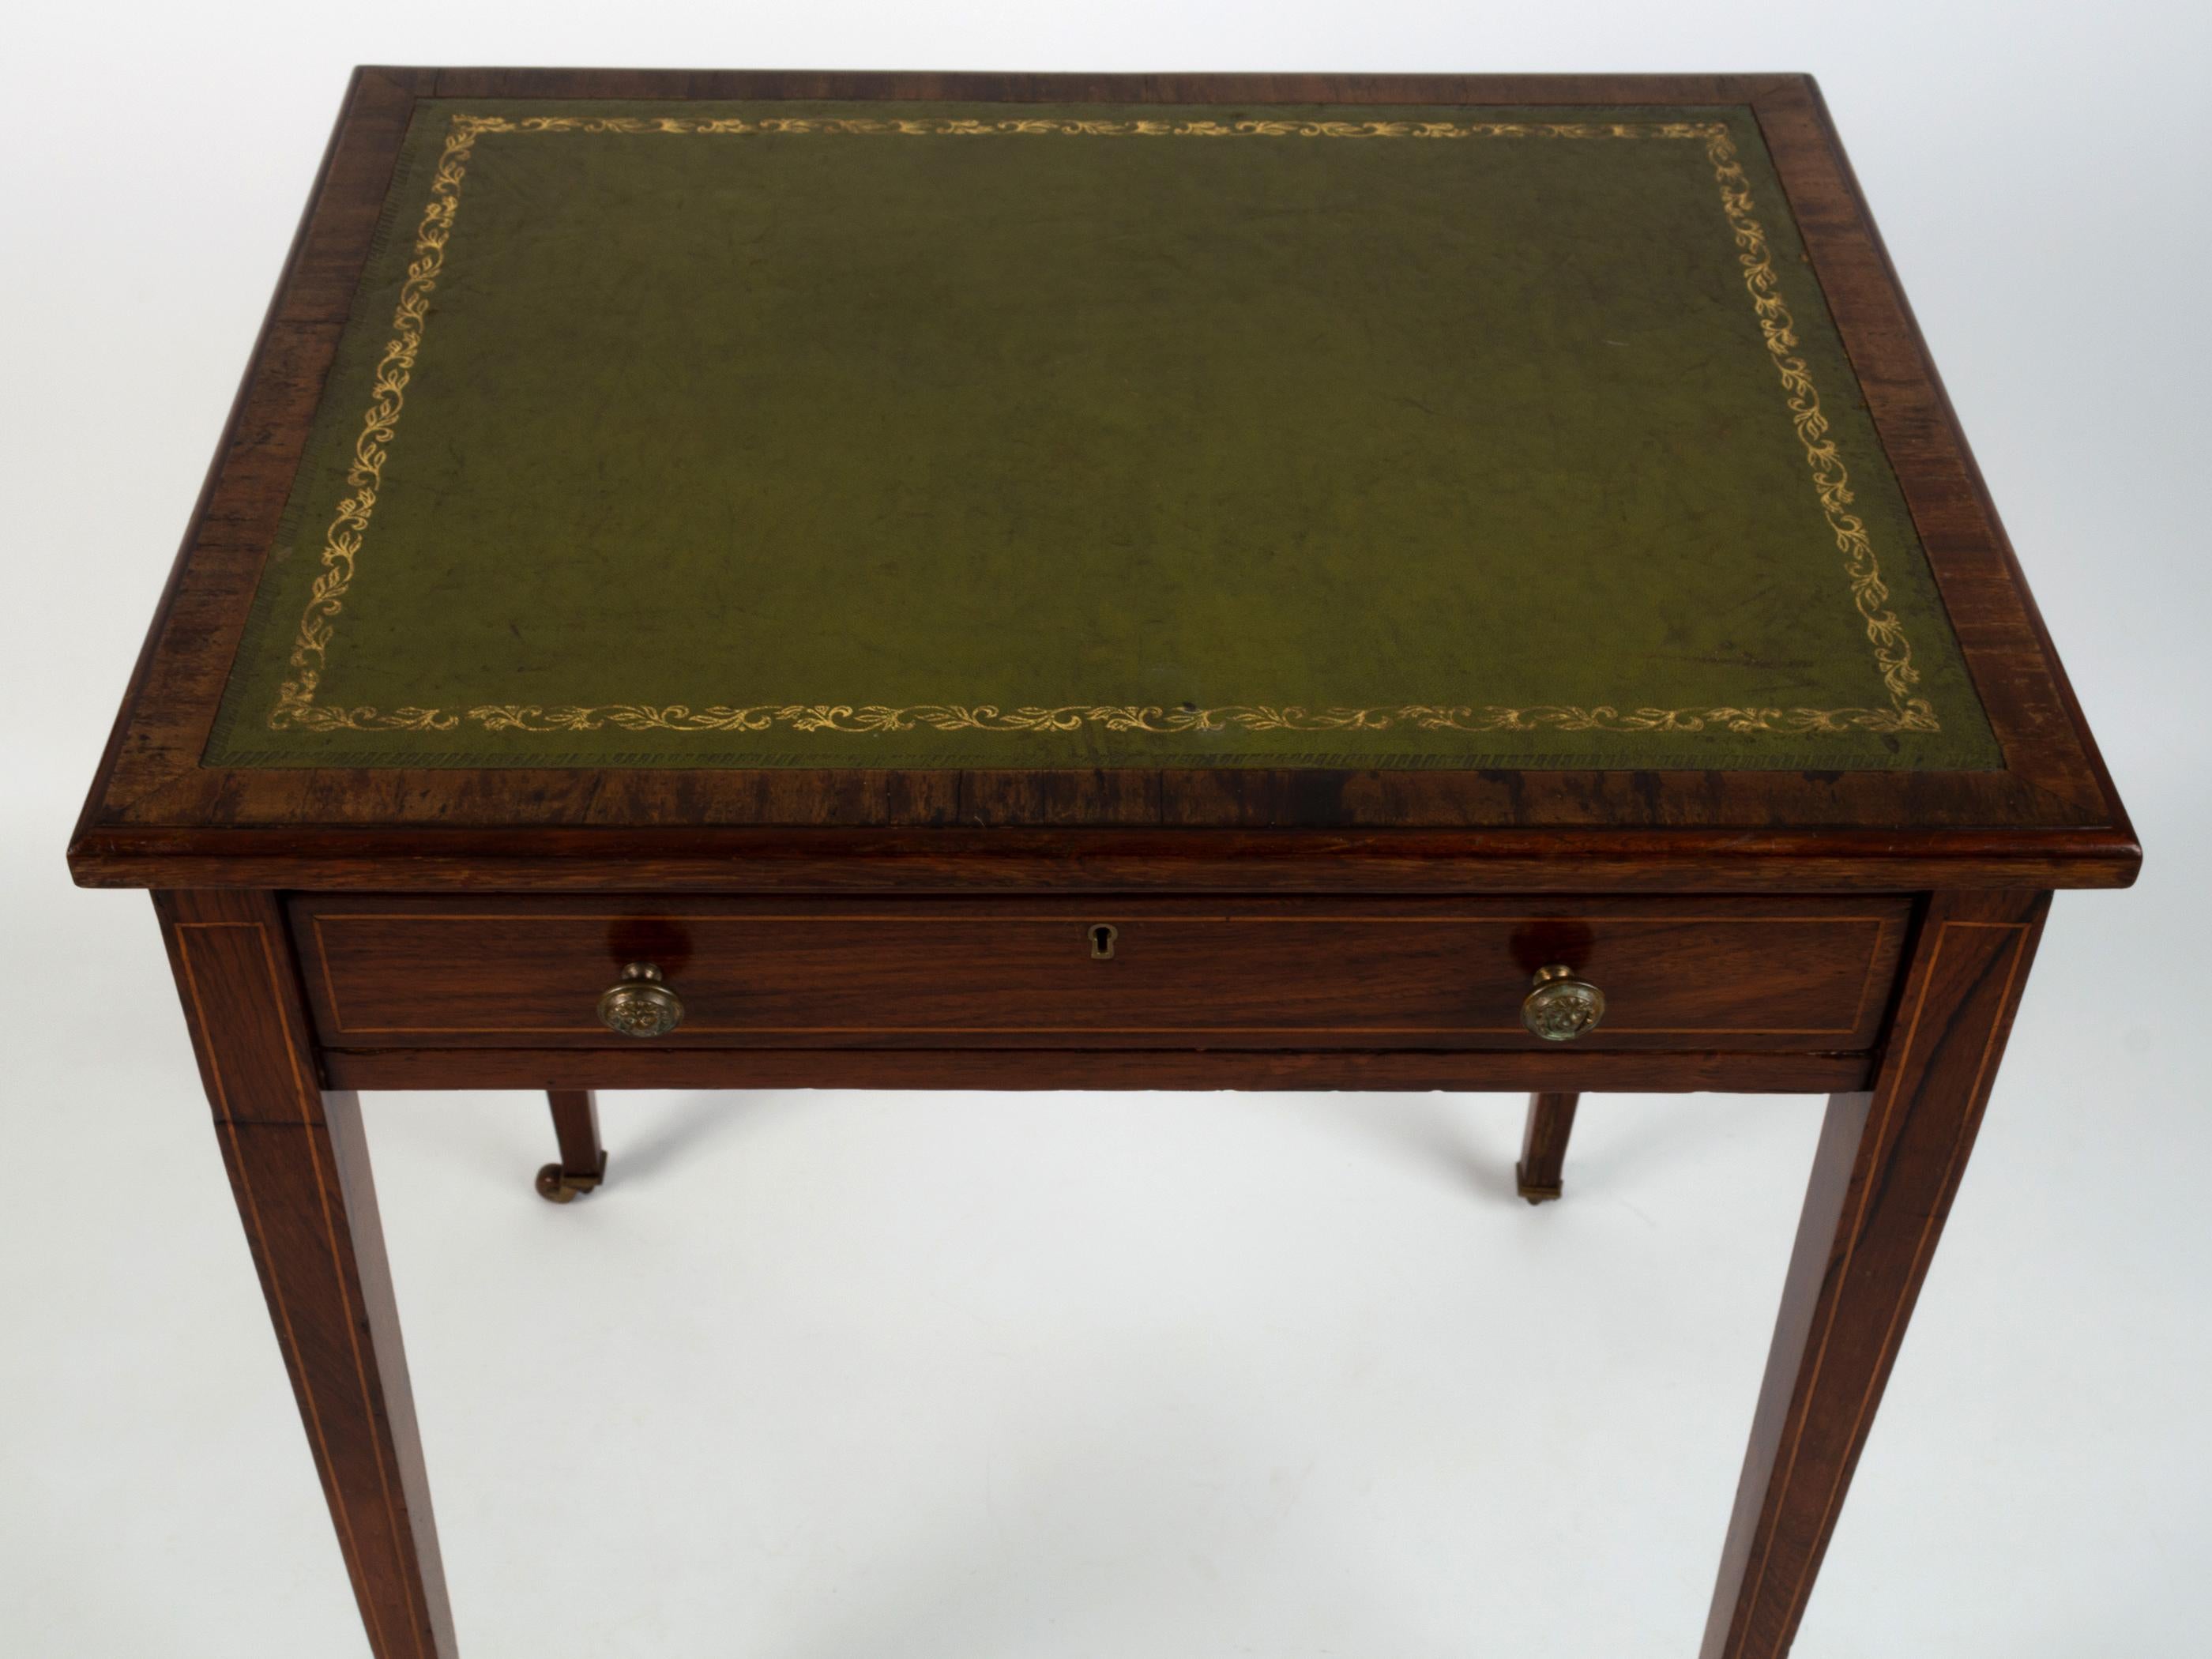 Early 20th Century Antique English Georgian Style Rosewood Leather Inlaid Writing Table Desk C.1900